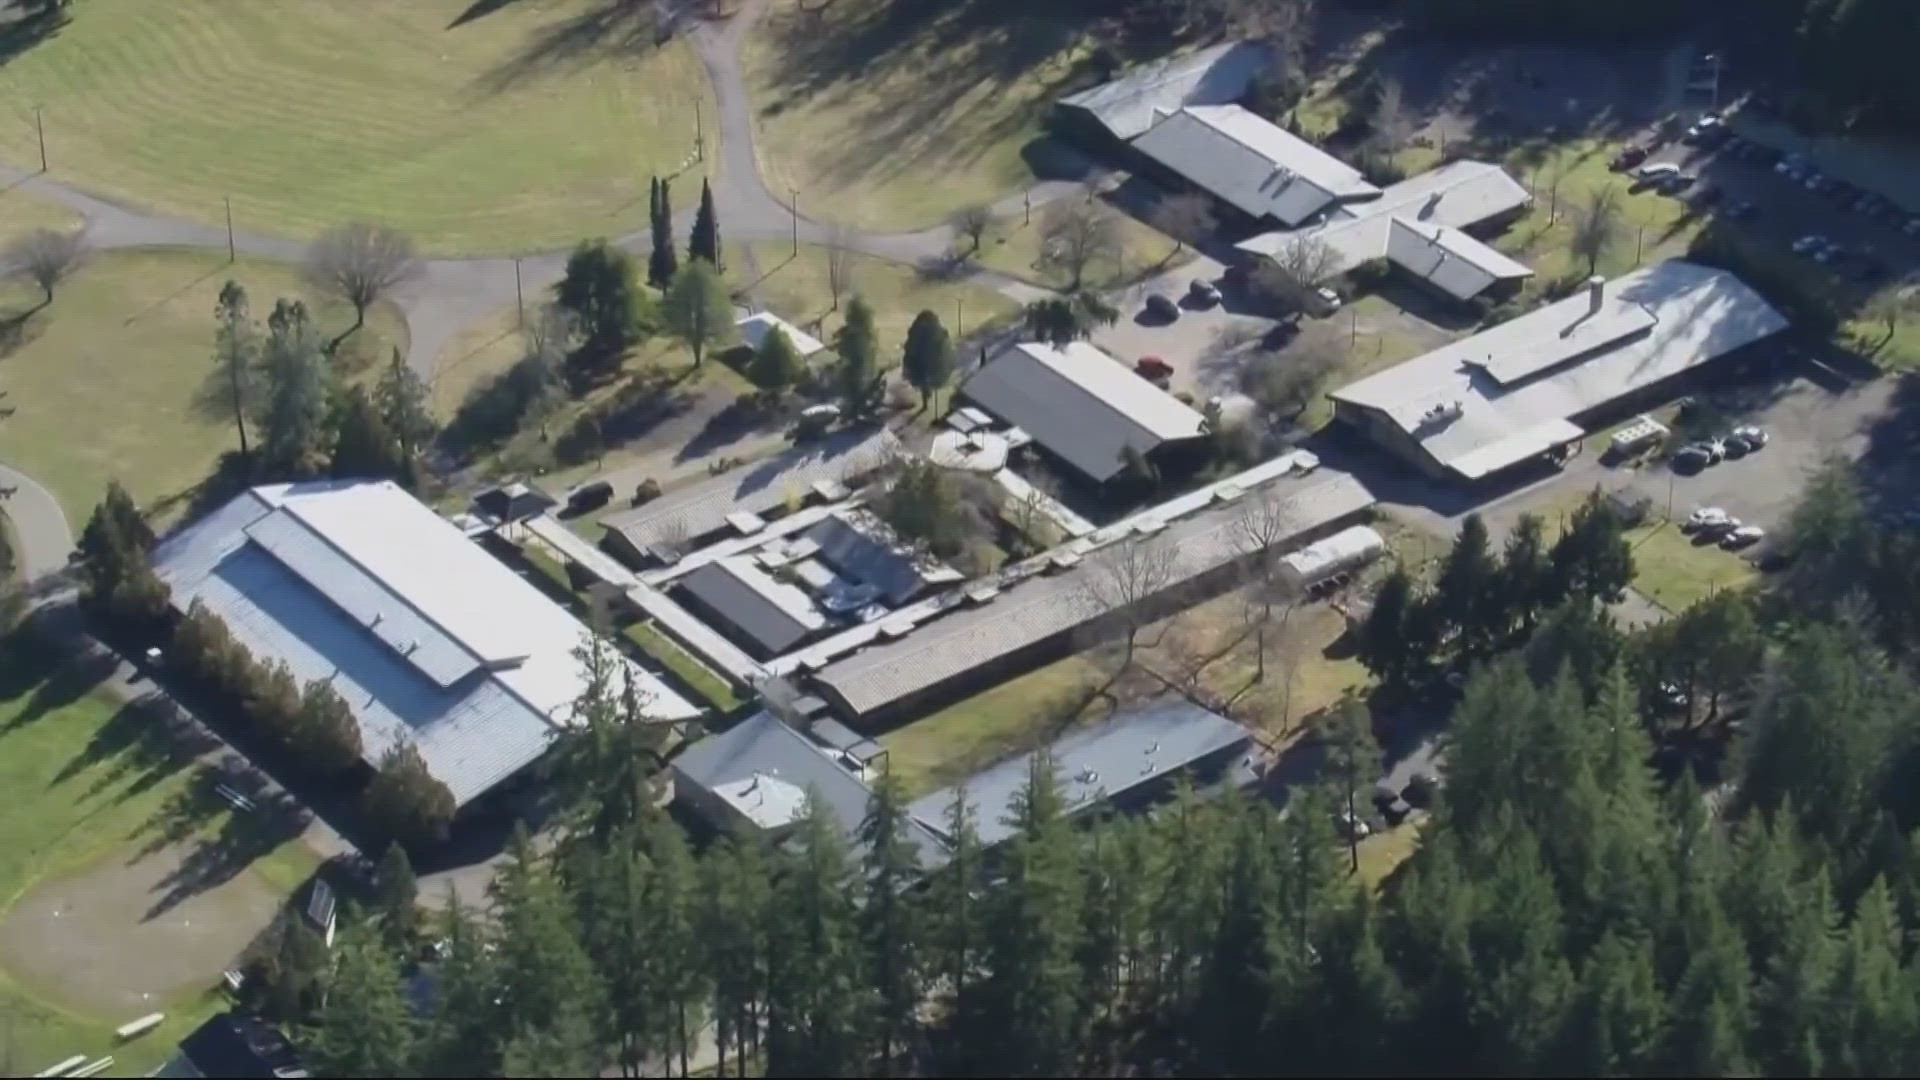 Staff reported the teens assaulted one of the staff members at the Snoqualmie facility, stole a vehicle and fled the area. Three of the teens have been apprehended.